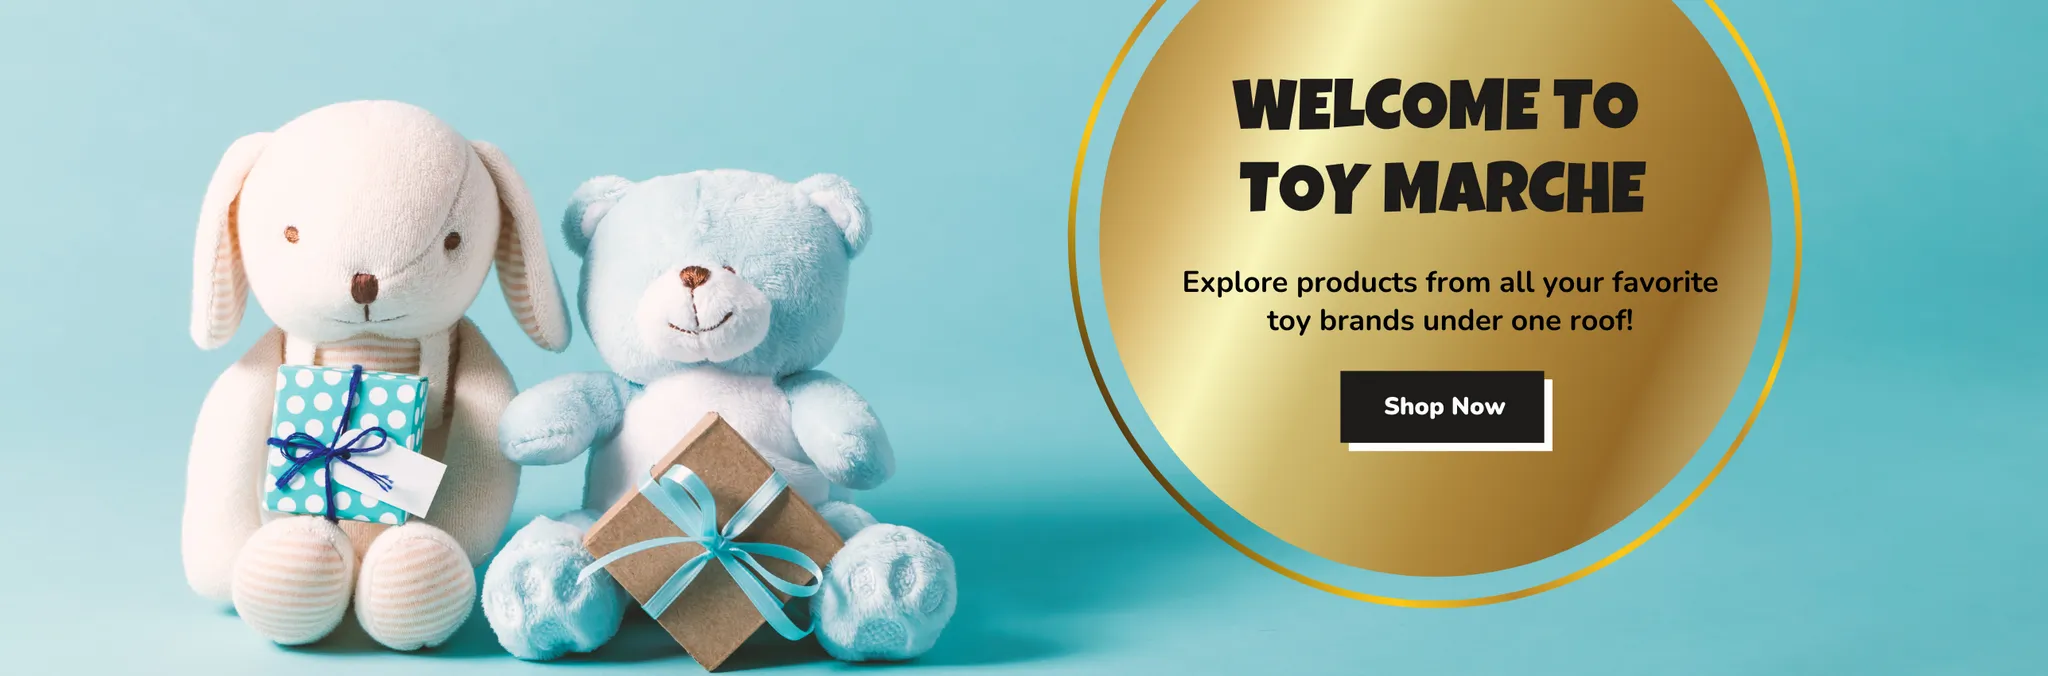 Welcome to Toy Marche